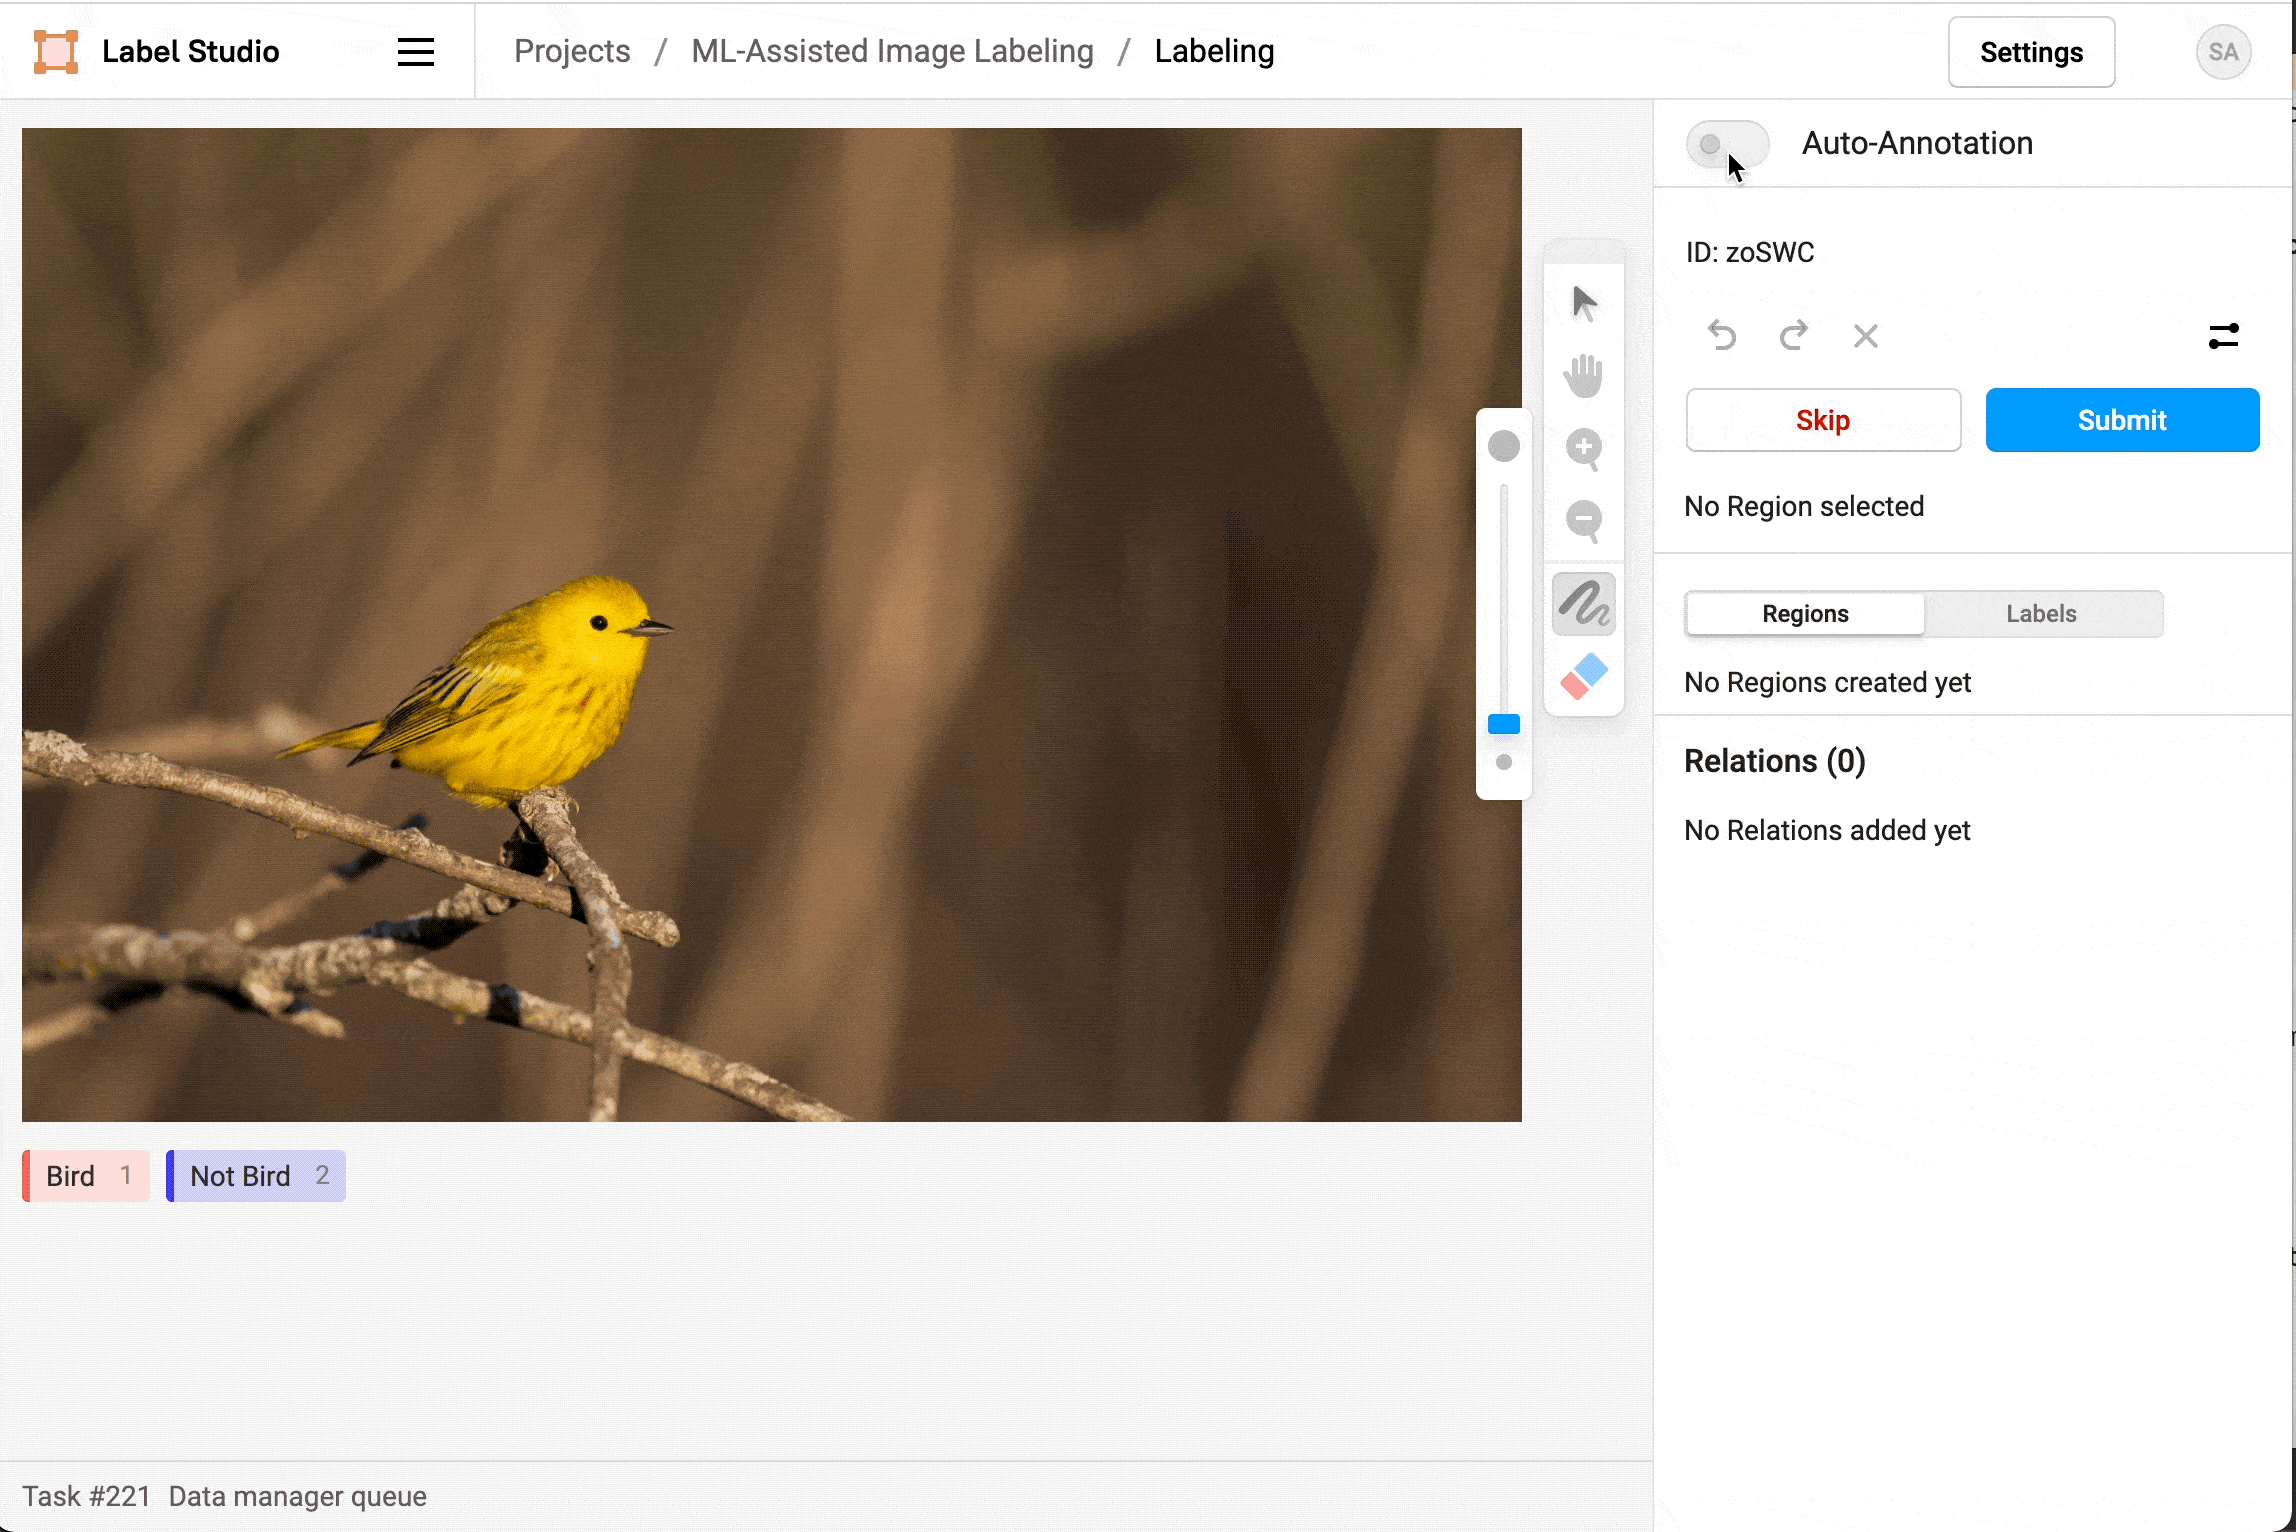 Gif showing labeling with the manual brush tool some tree branches as not bird, then enabling auto annotation and using the smart keypoint tool to select the bird and then a gray brush mask appears on the bird and that region is labeled as bird.